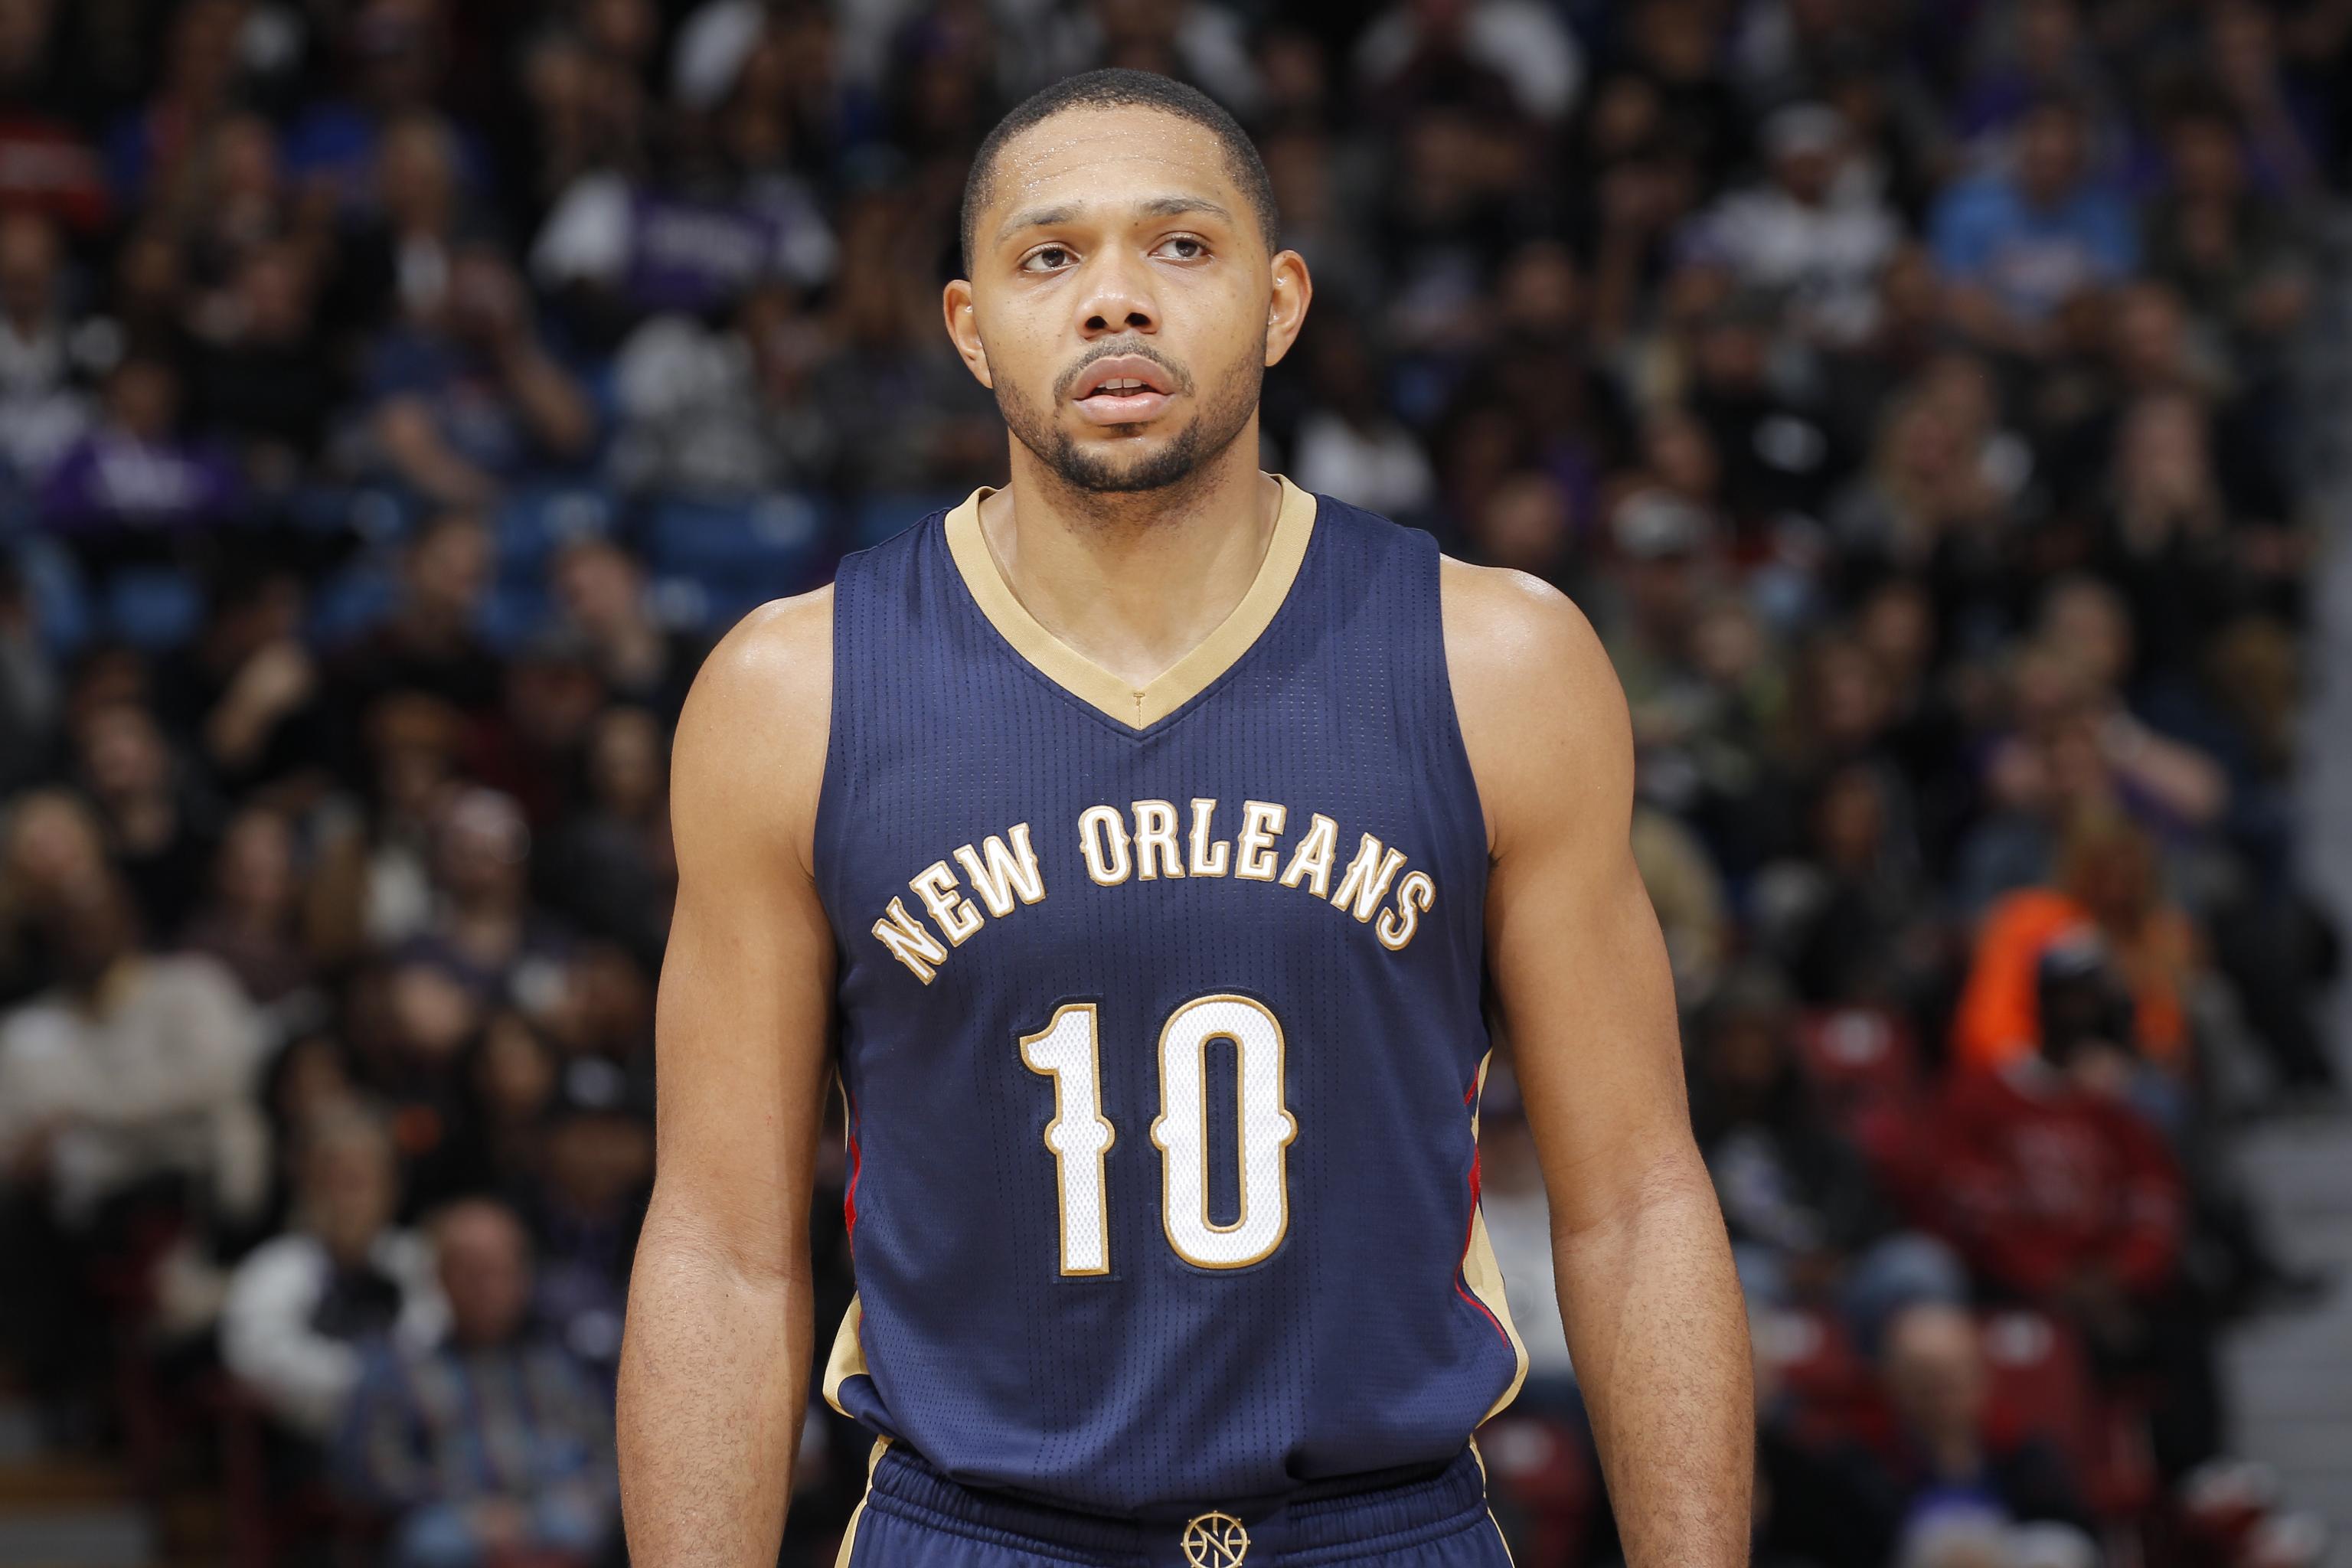 Houston Rockets spend $133 million to sign former Pelicans Eric